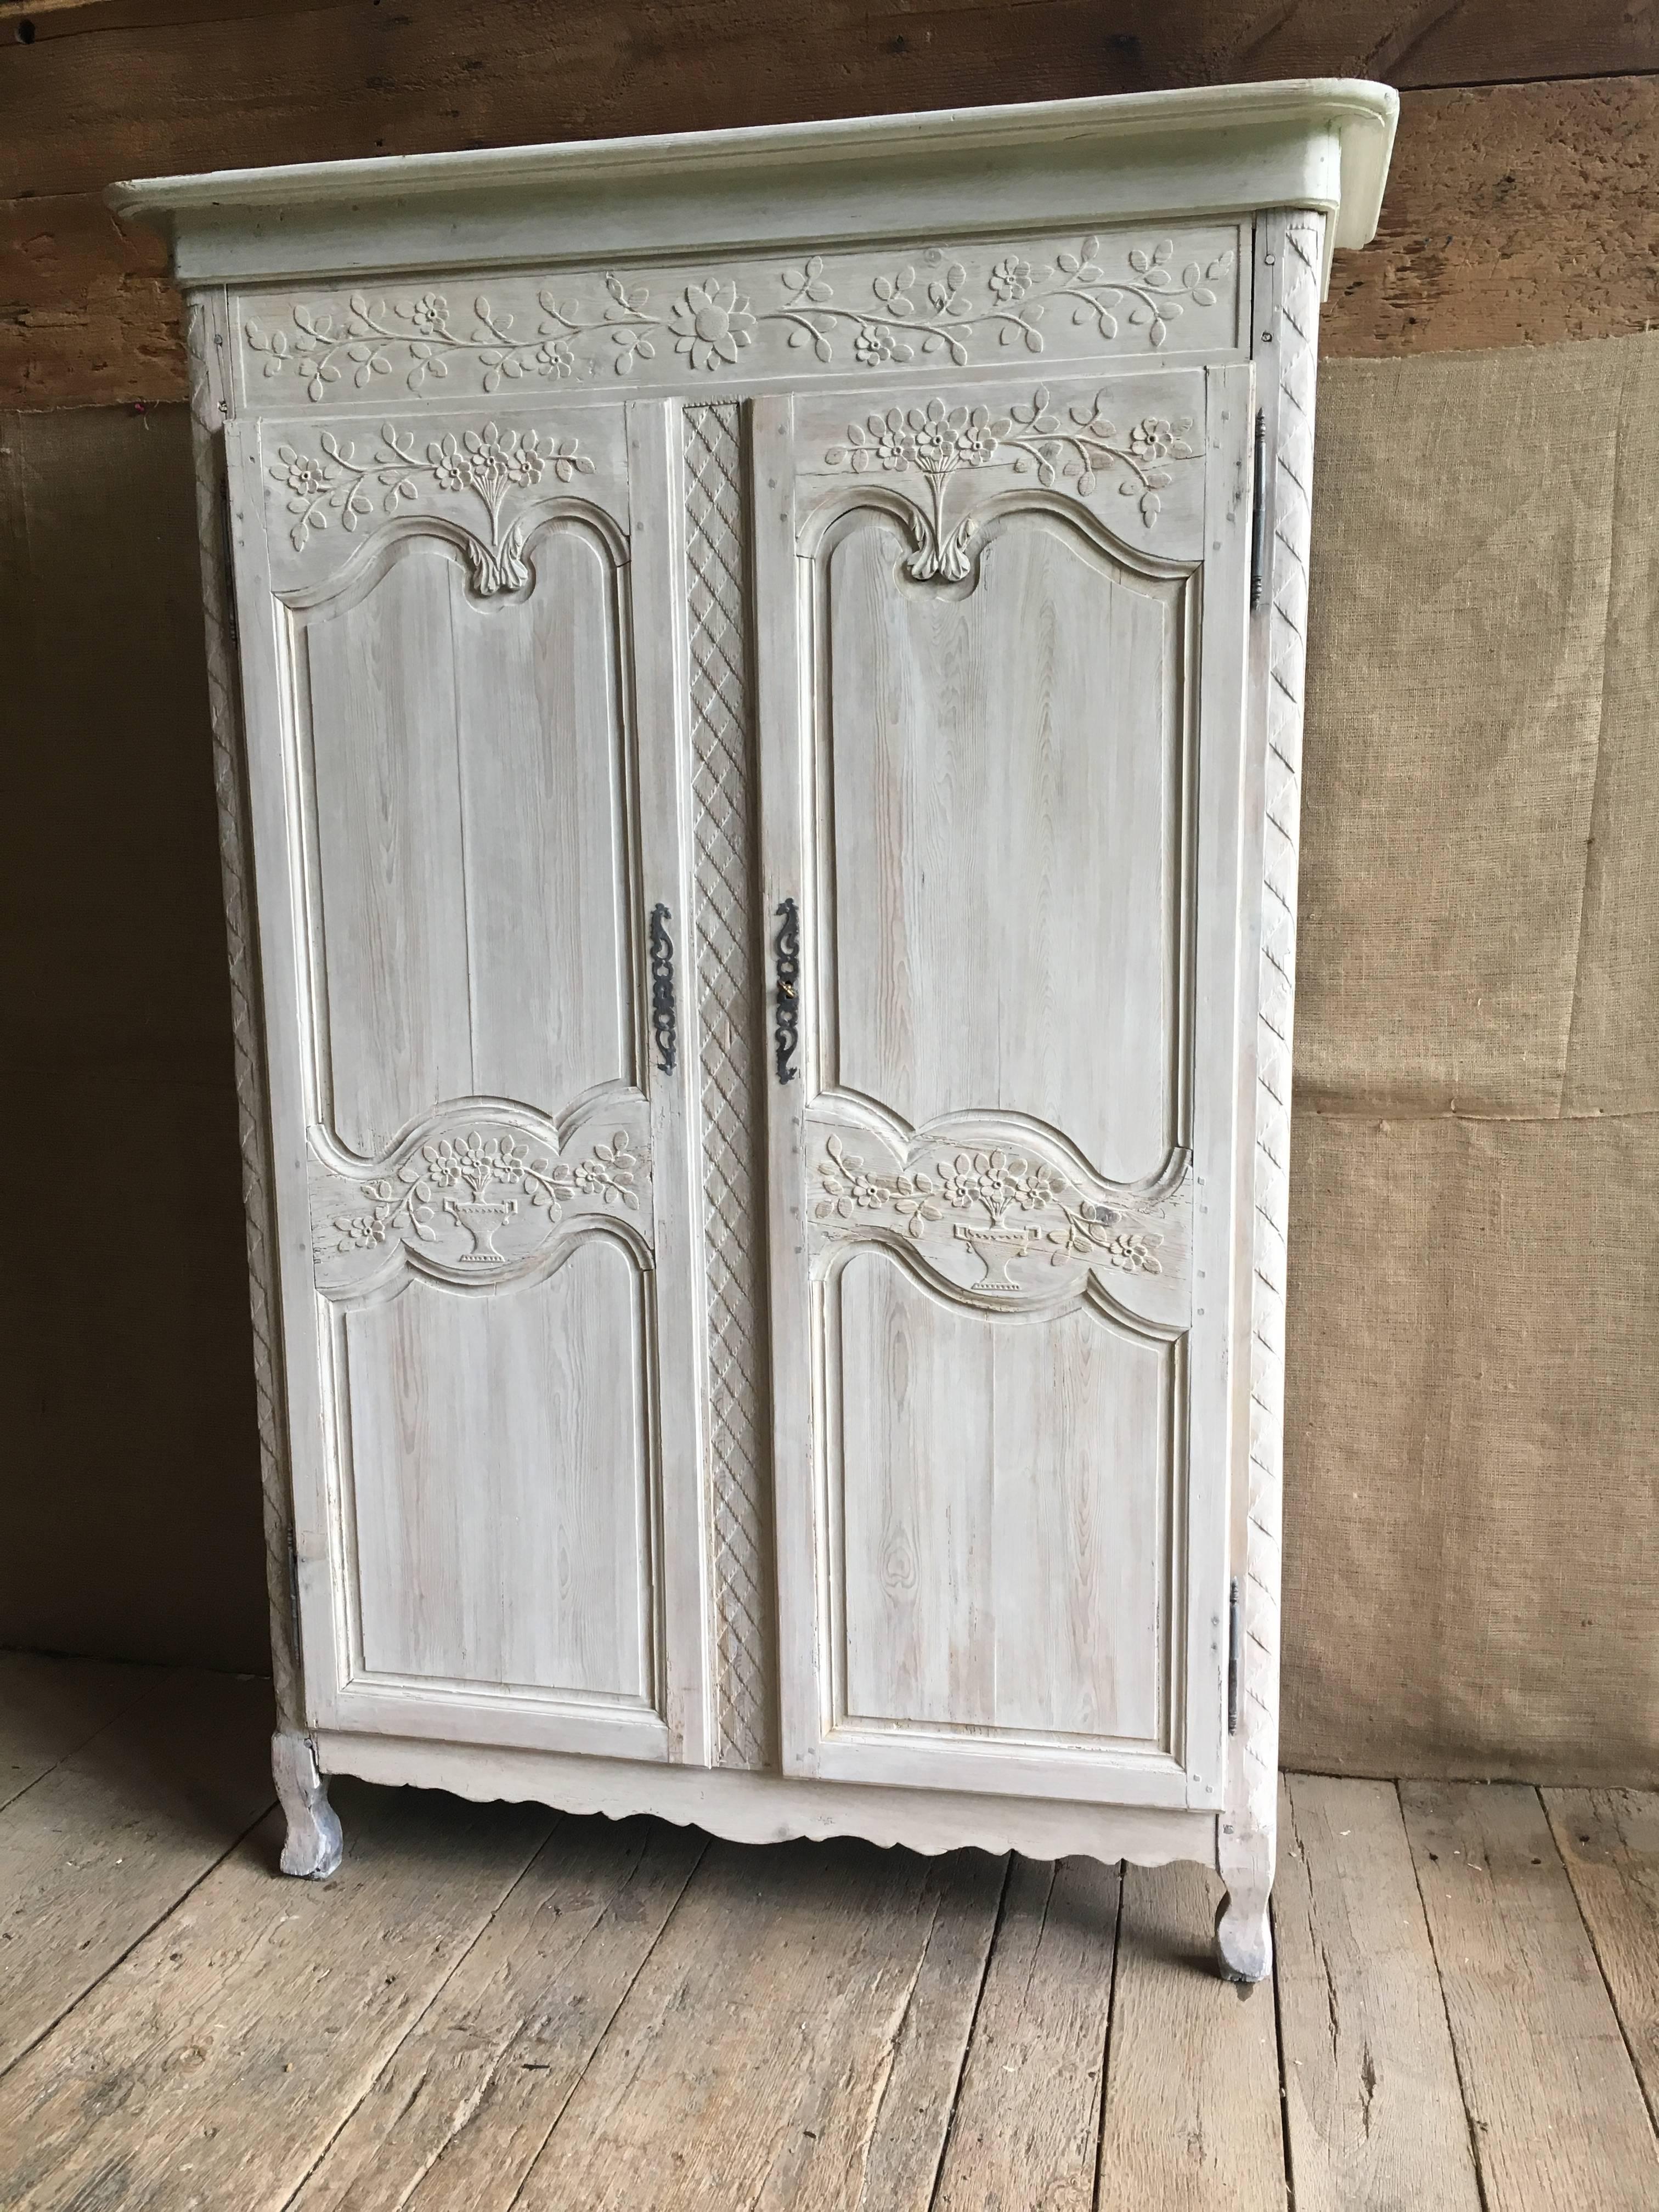 A French Louis XV period pine armoire from Normandy, circa 1780, abundantly carved with bouquets, baskets, garlands, etc. and with a bleached and whitewashed finish. The interior has two shelves and is painted light blue/grey.
Dimensions at crown: